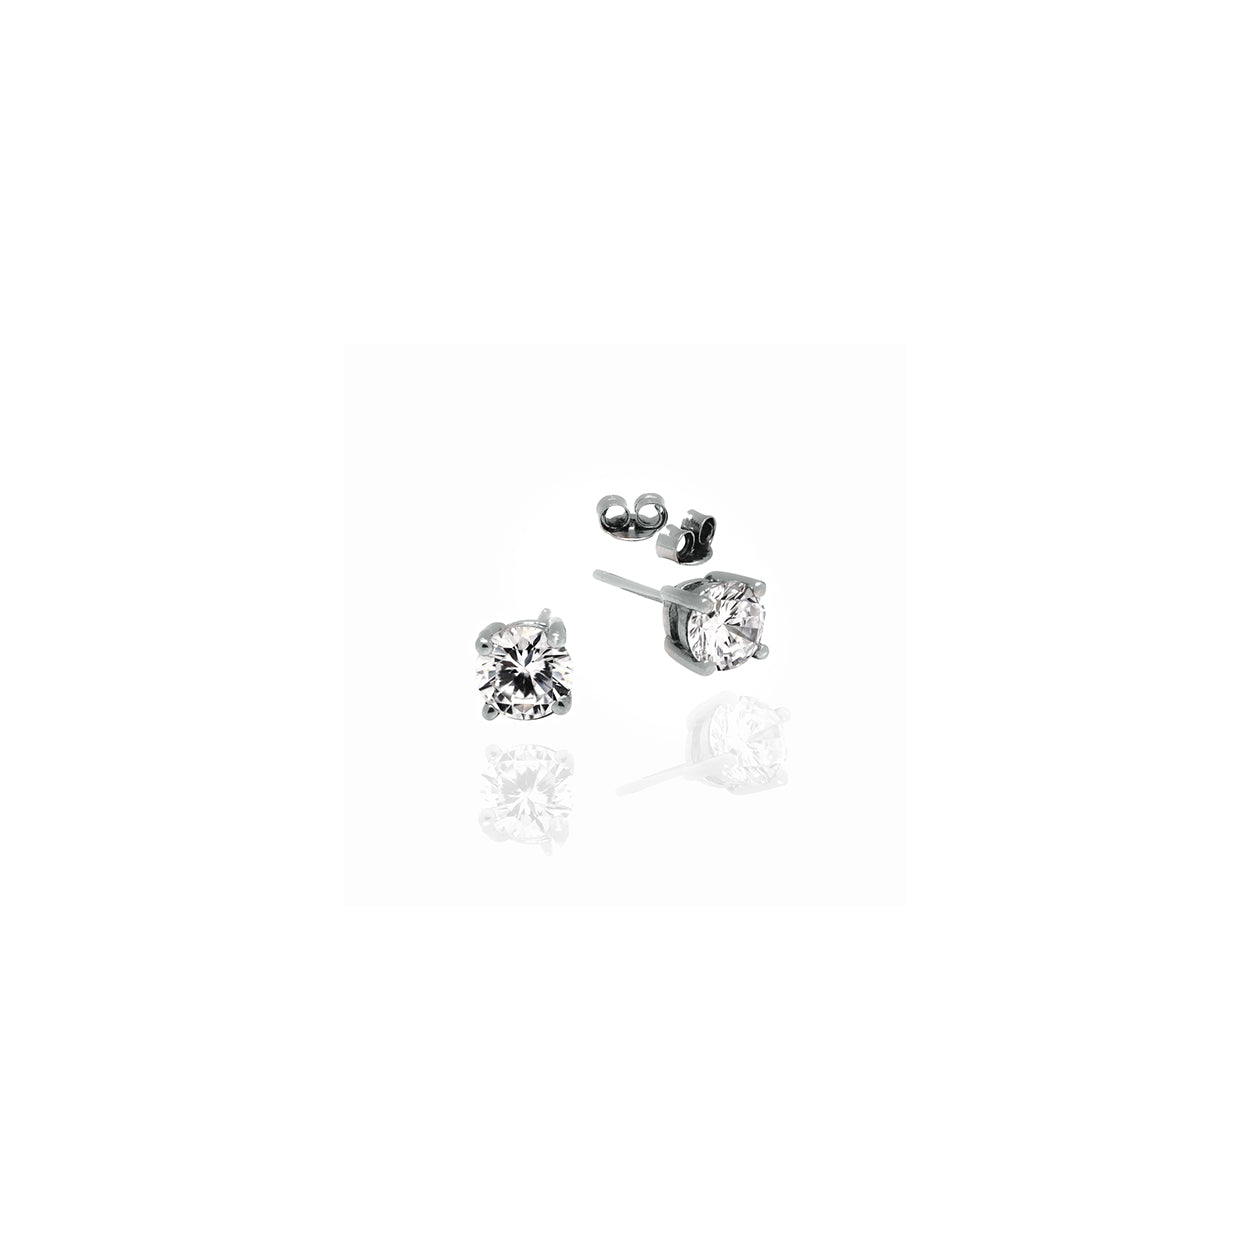 3mm Silver Stud Earrings with Cubic Zirconia